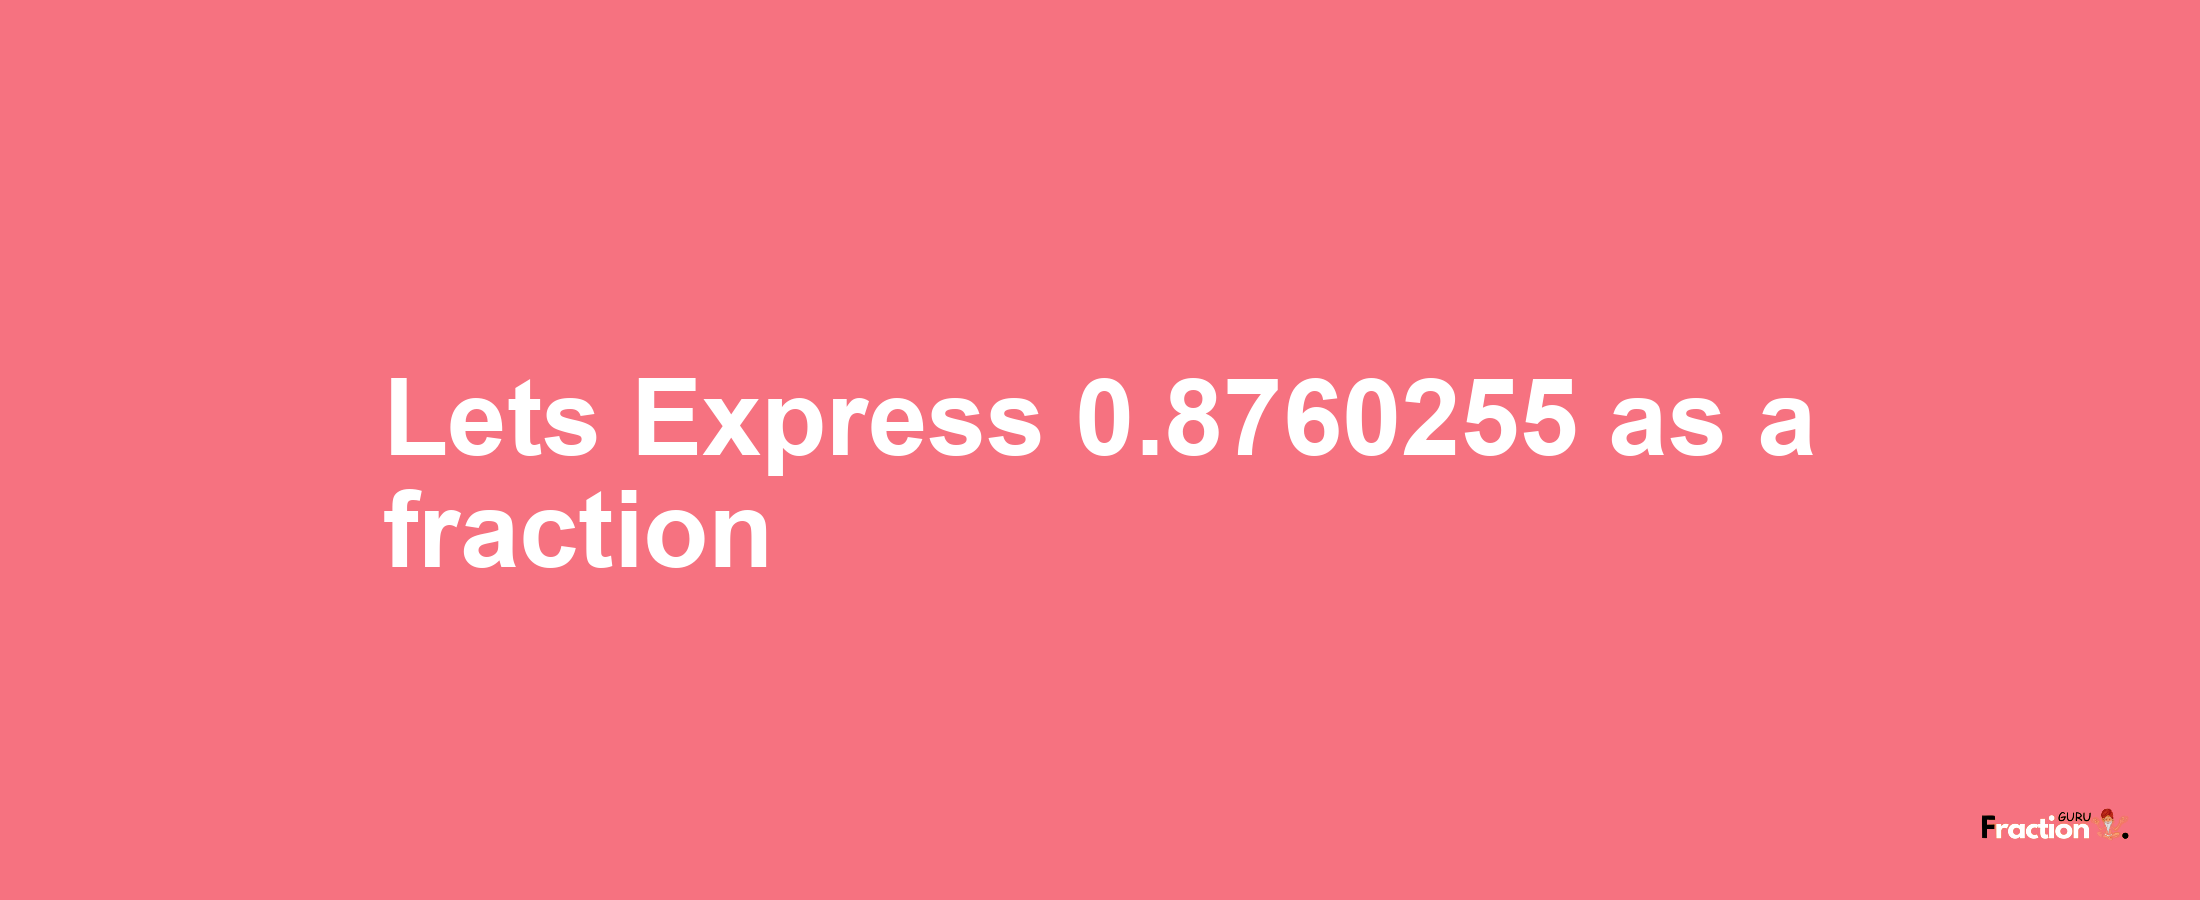 Lets Express 0.8760255 as afraction